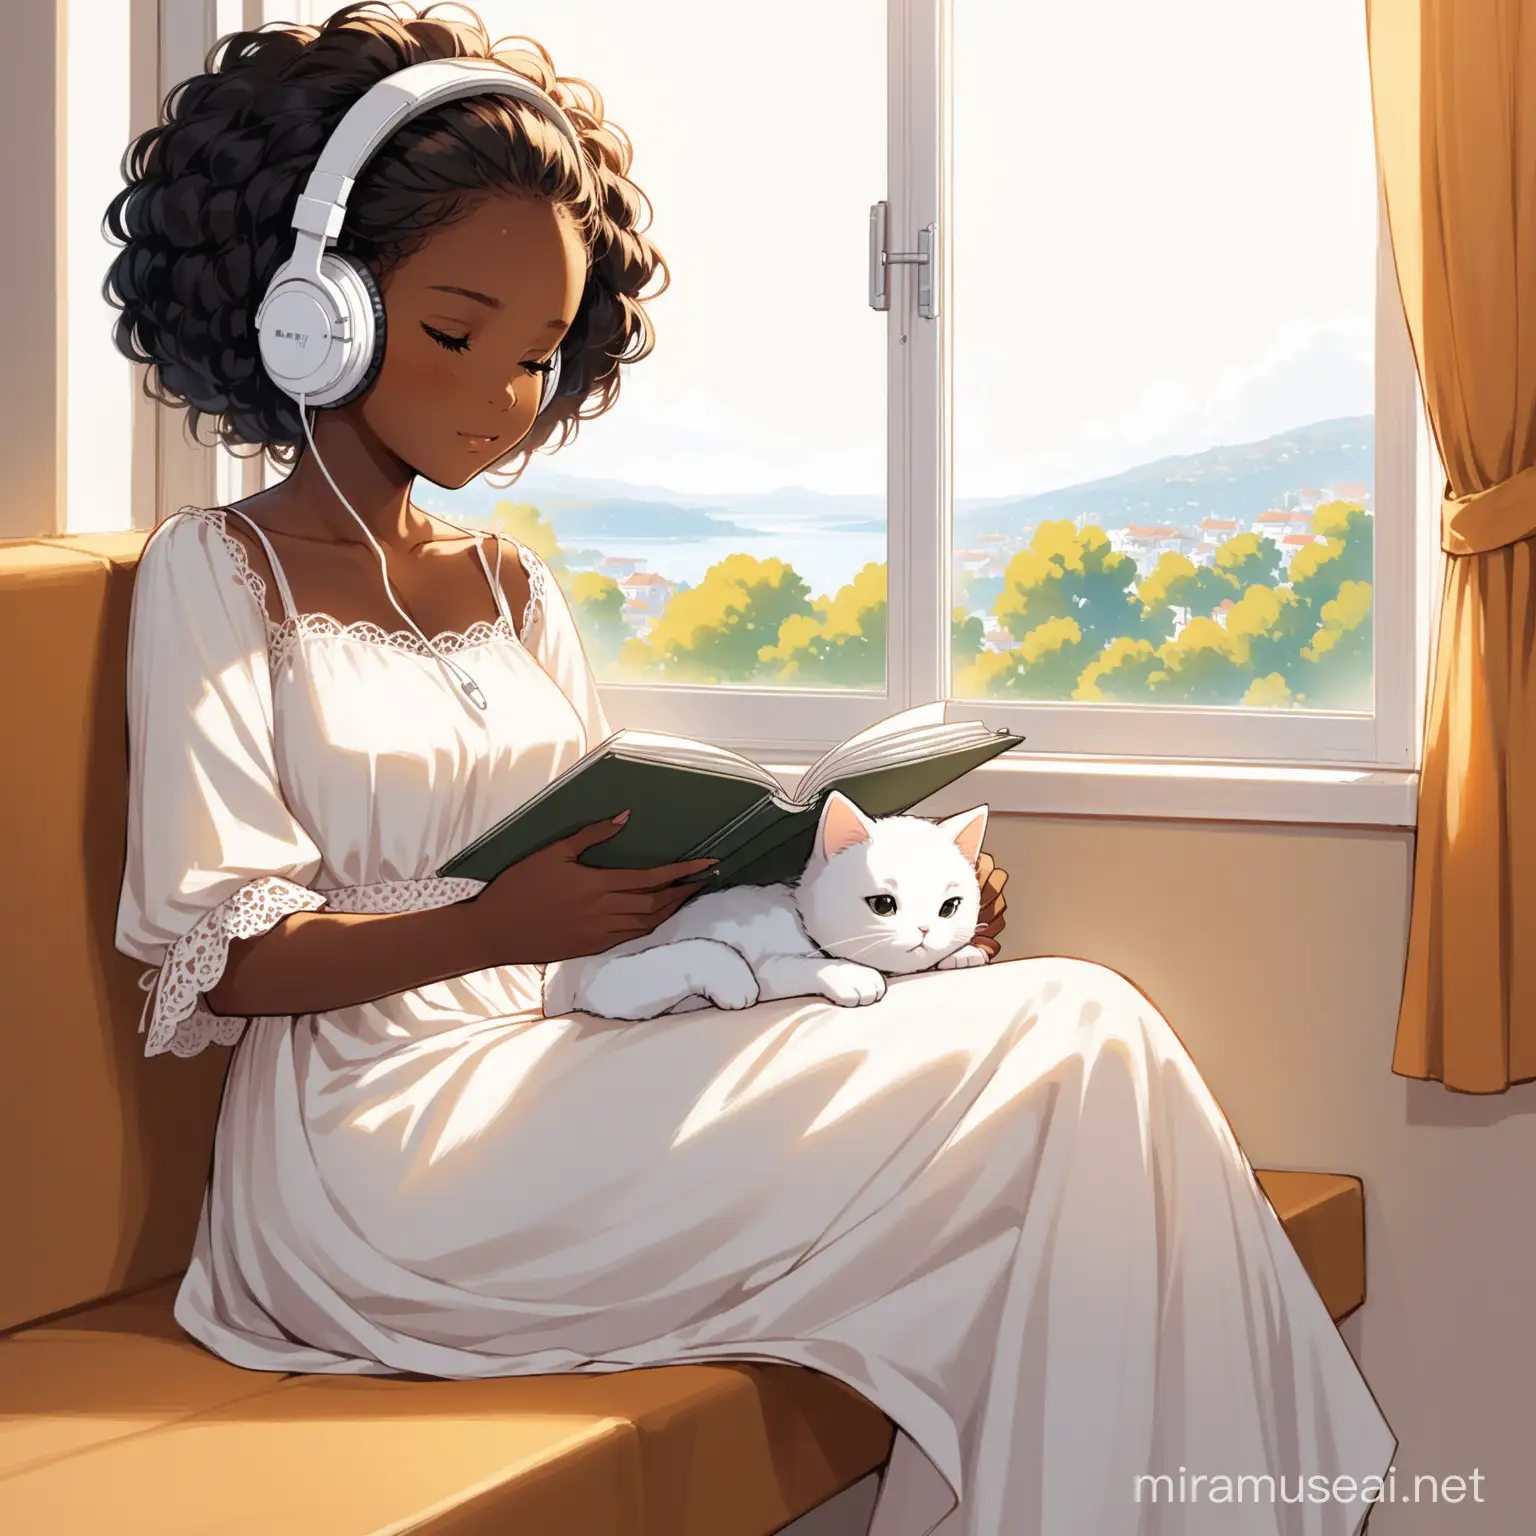 Black girl with a long flower dress on and headphones sitting on window seat while drawing in sketchbook  while relaxing with her fuffy white cat.